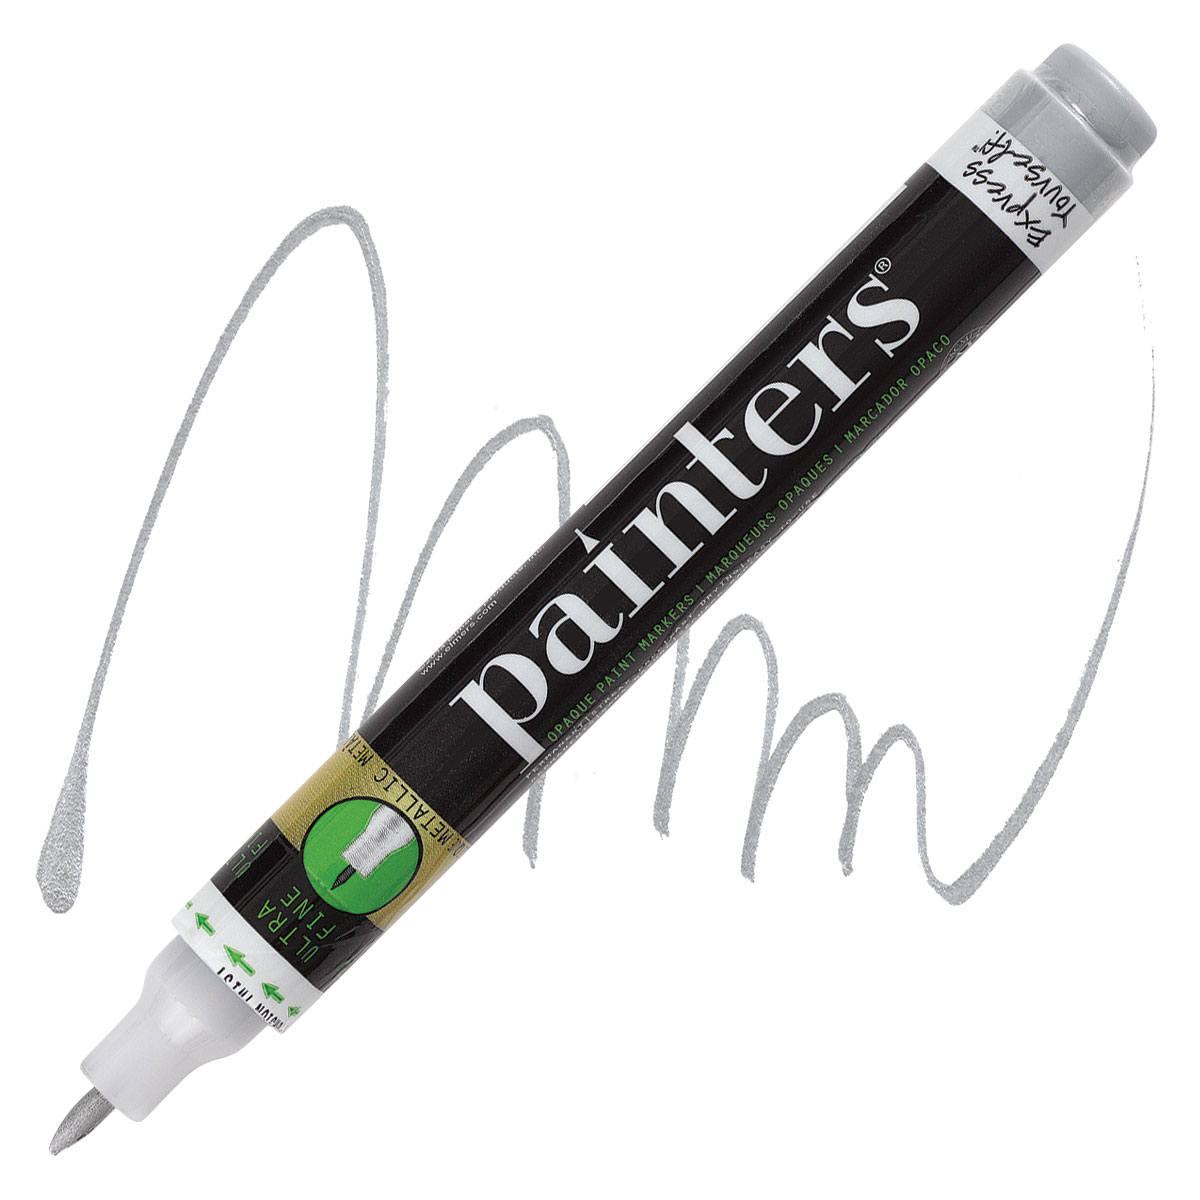  ELMERS Painters Opaque Paint Marker, Medium Tip, Hunter's Green  (7452) : Arts, Crafts & Sewing